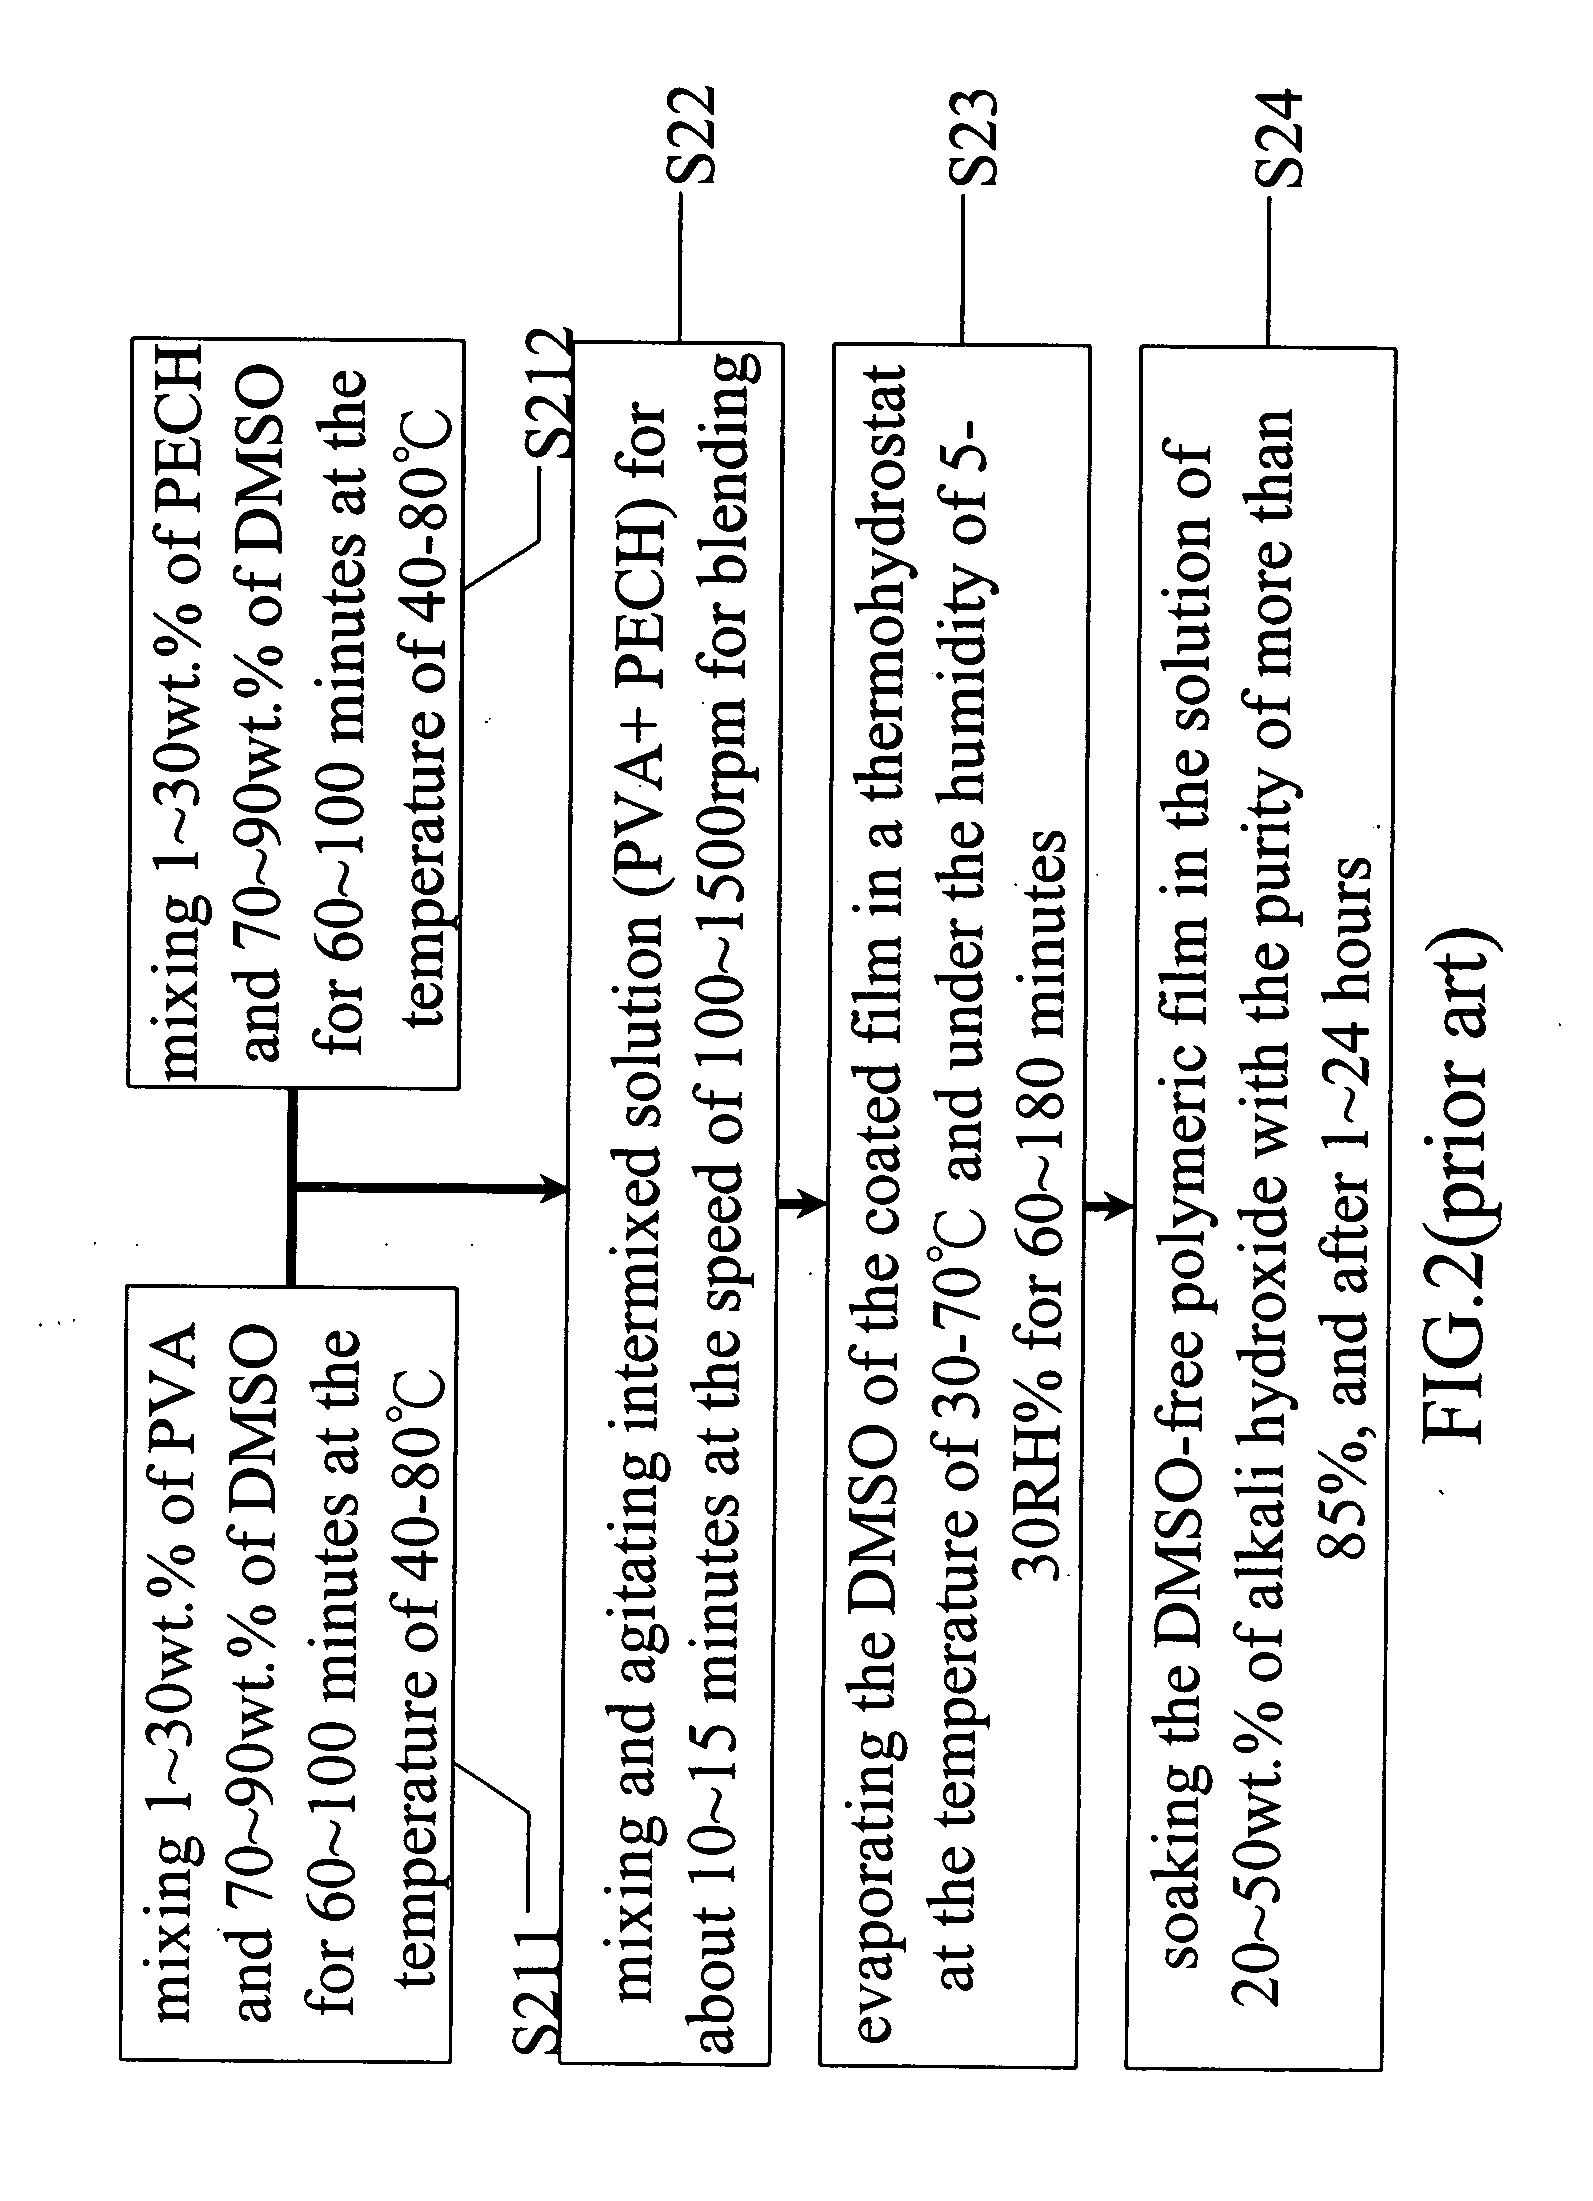 Fabrication method of a basic polymer electrolyte film of blended polyvinyl alcohol and quaternary amine